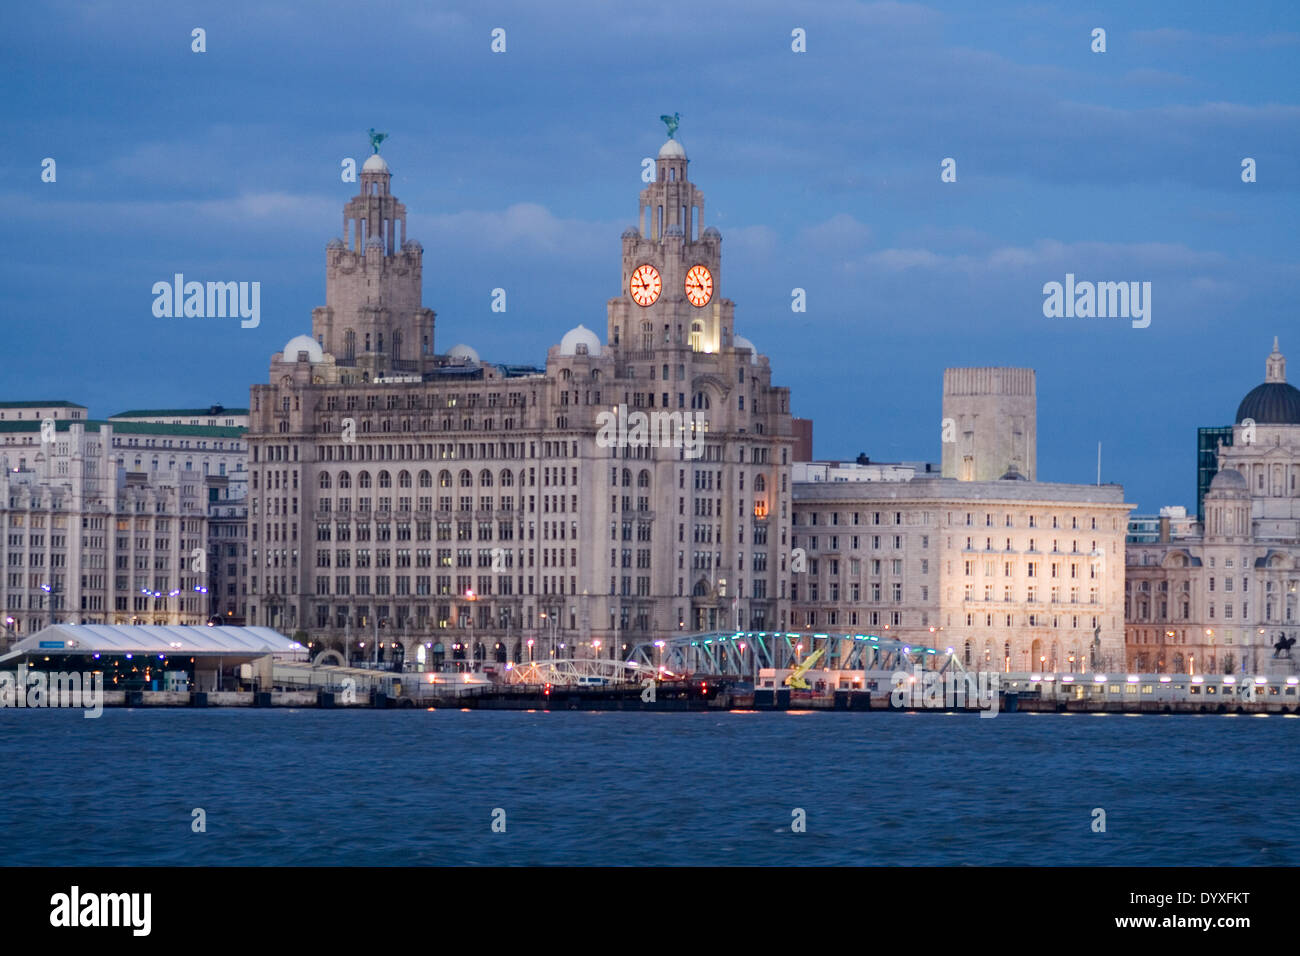 The liver building on liverpool water front at dusk Stock Photo